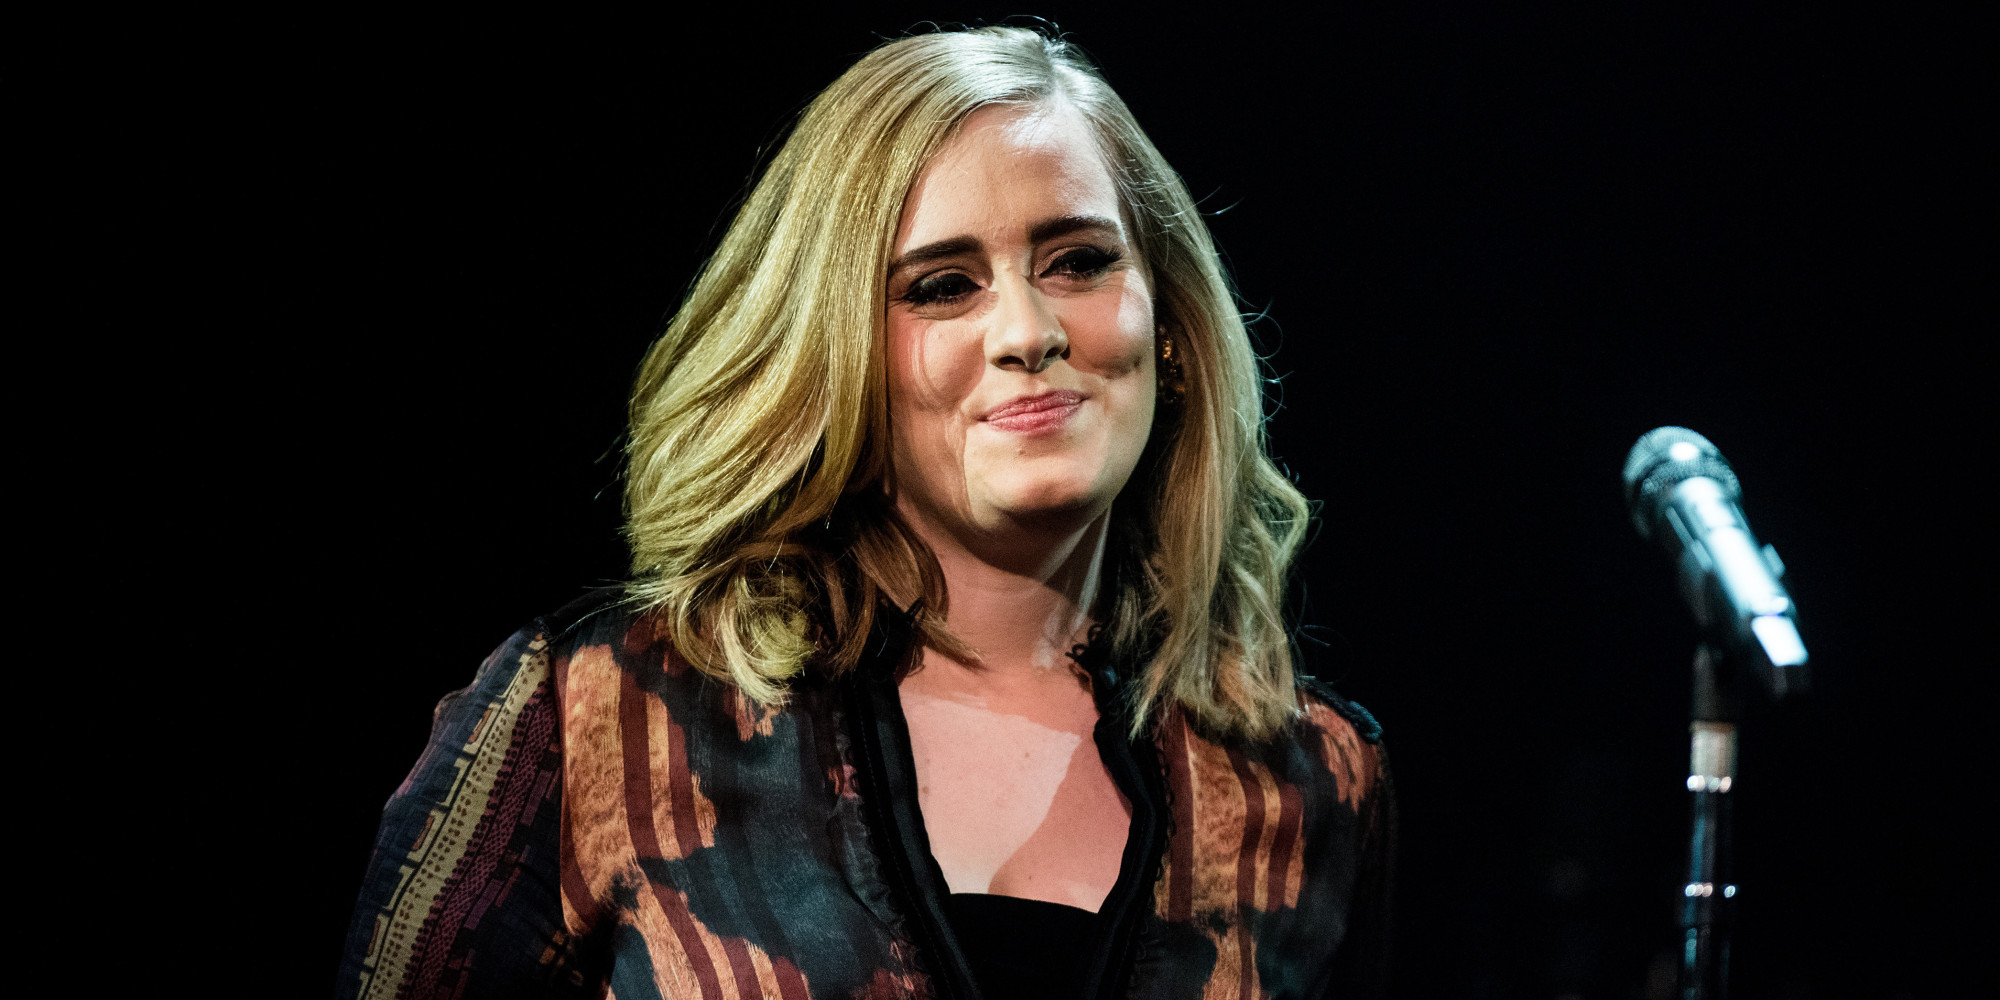 Adele Reveals New Short Hair Cut During X Factor Performance - General ...